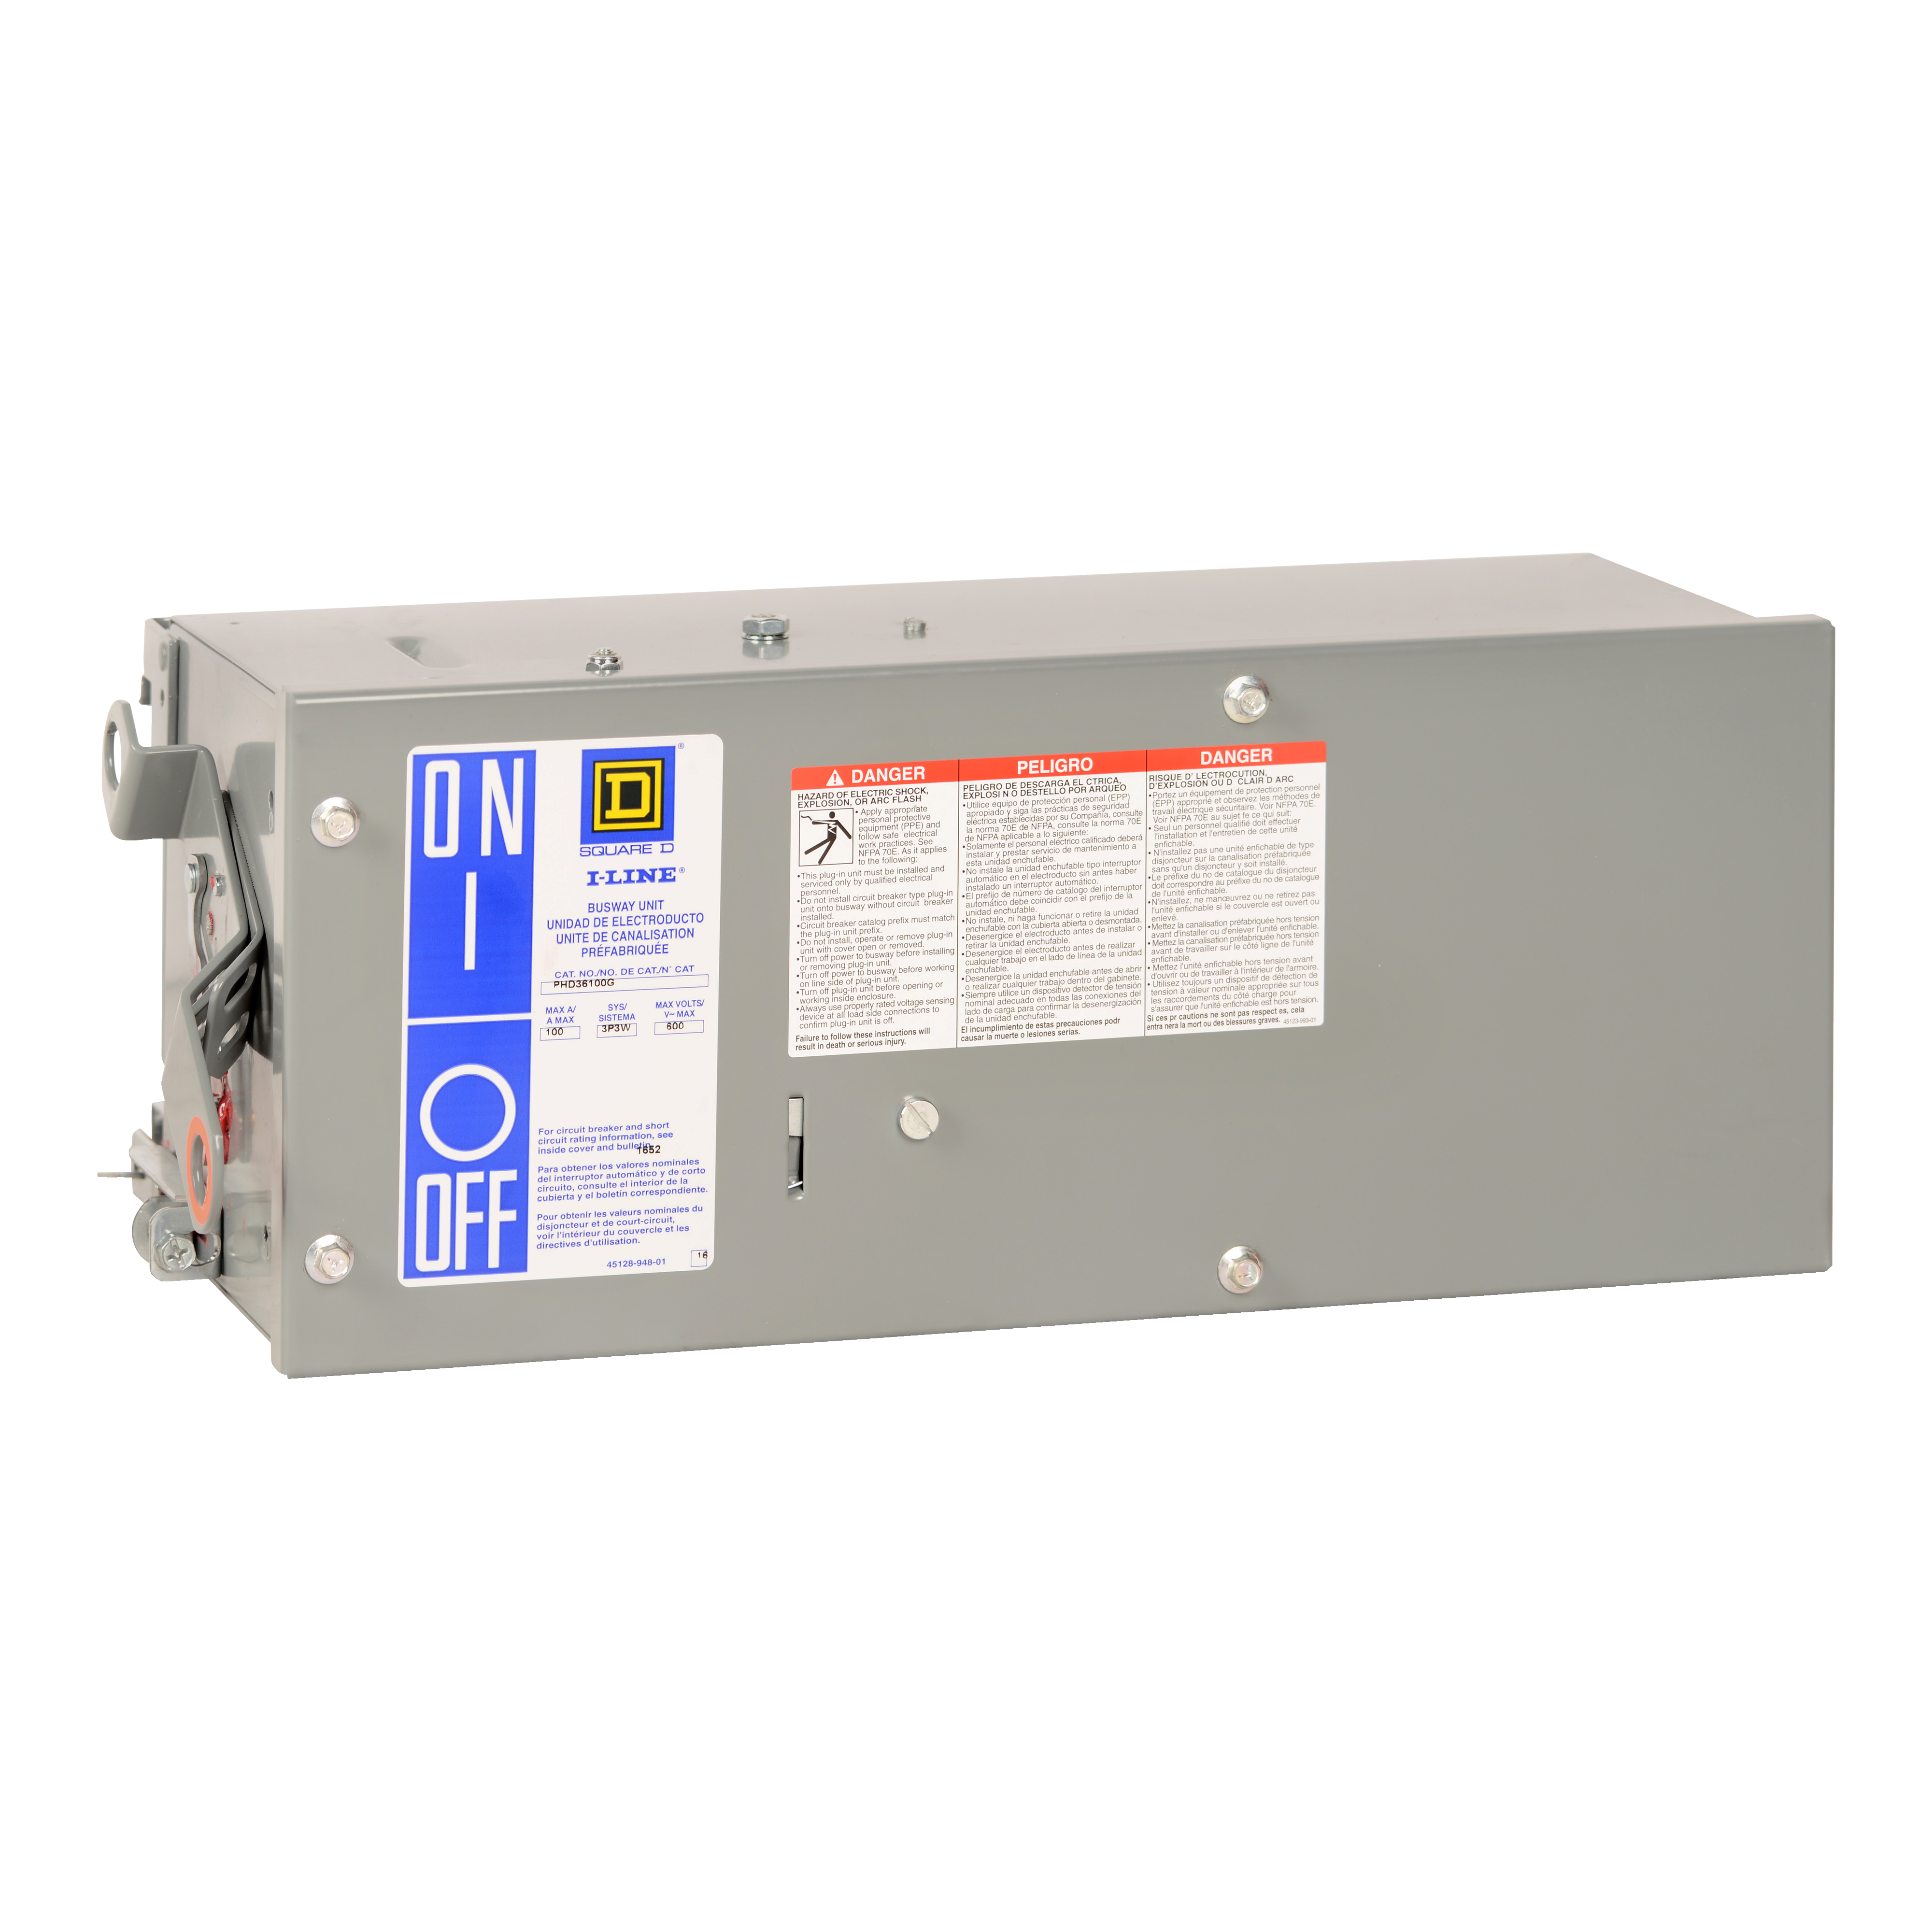 Plug-in unit, I-Line Busway, H-frame, 150A, 3 phase, 4 wire, 600VAC, 25kA, ground, neutral